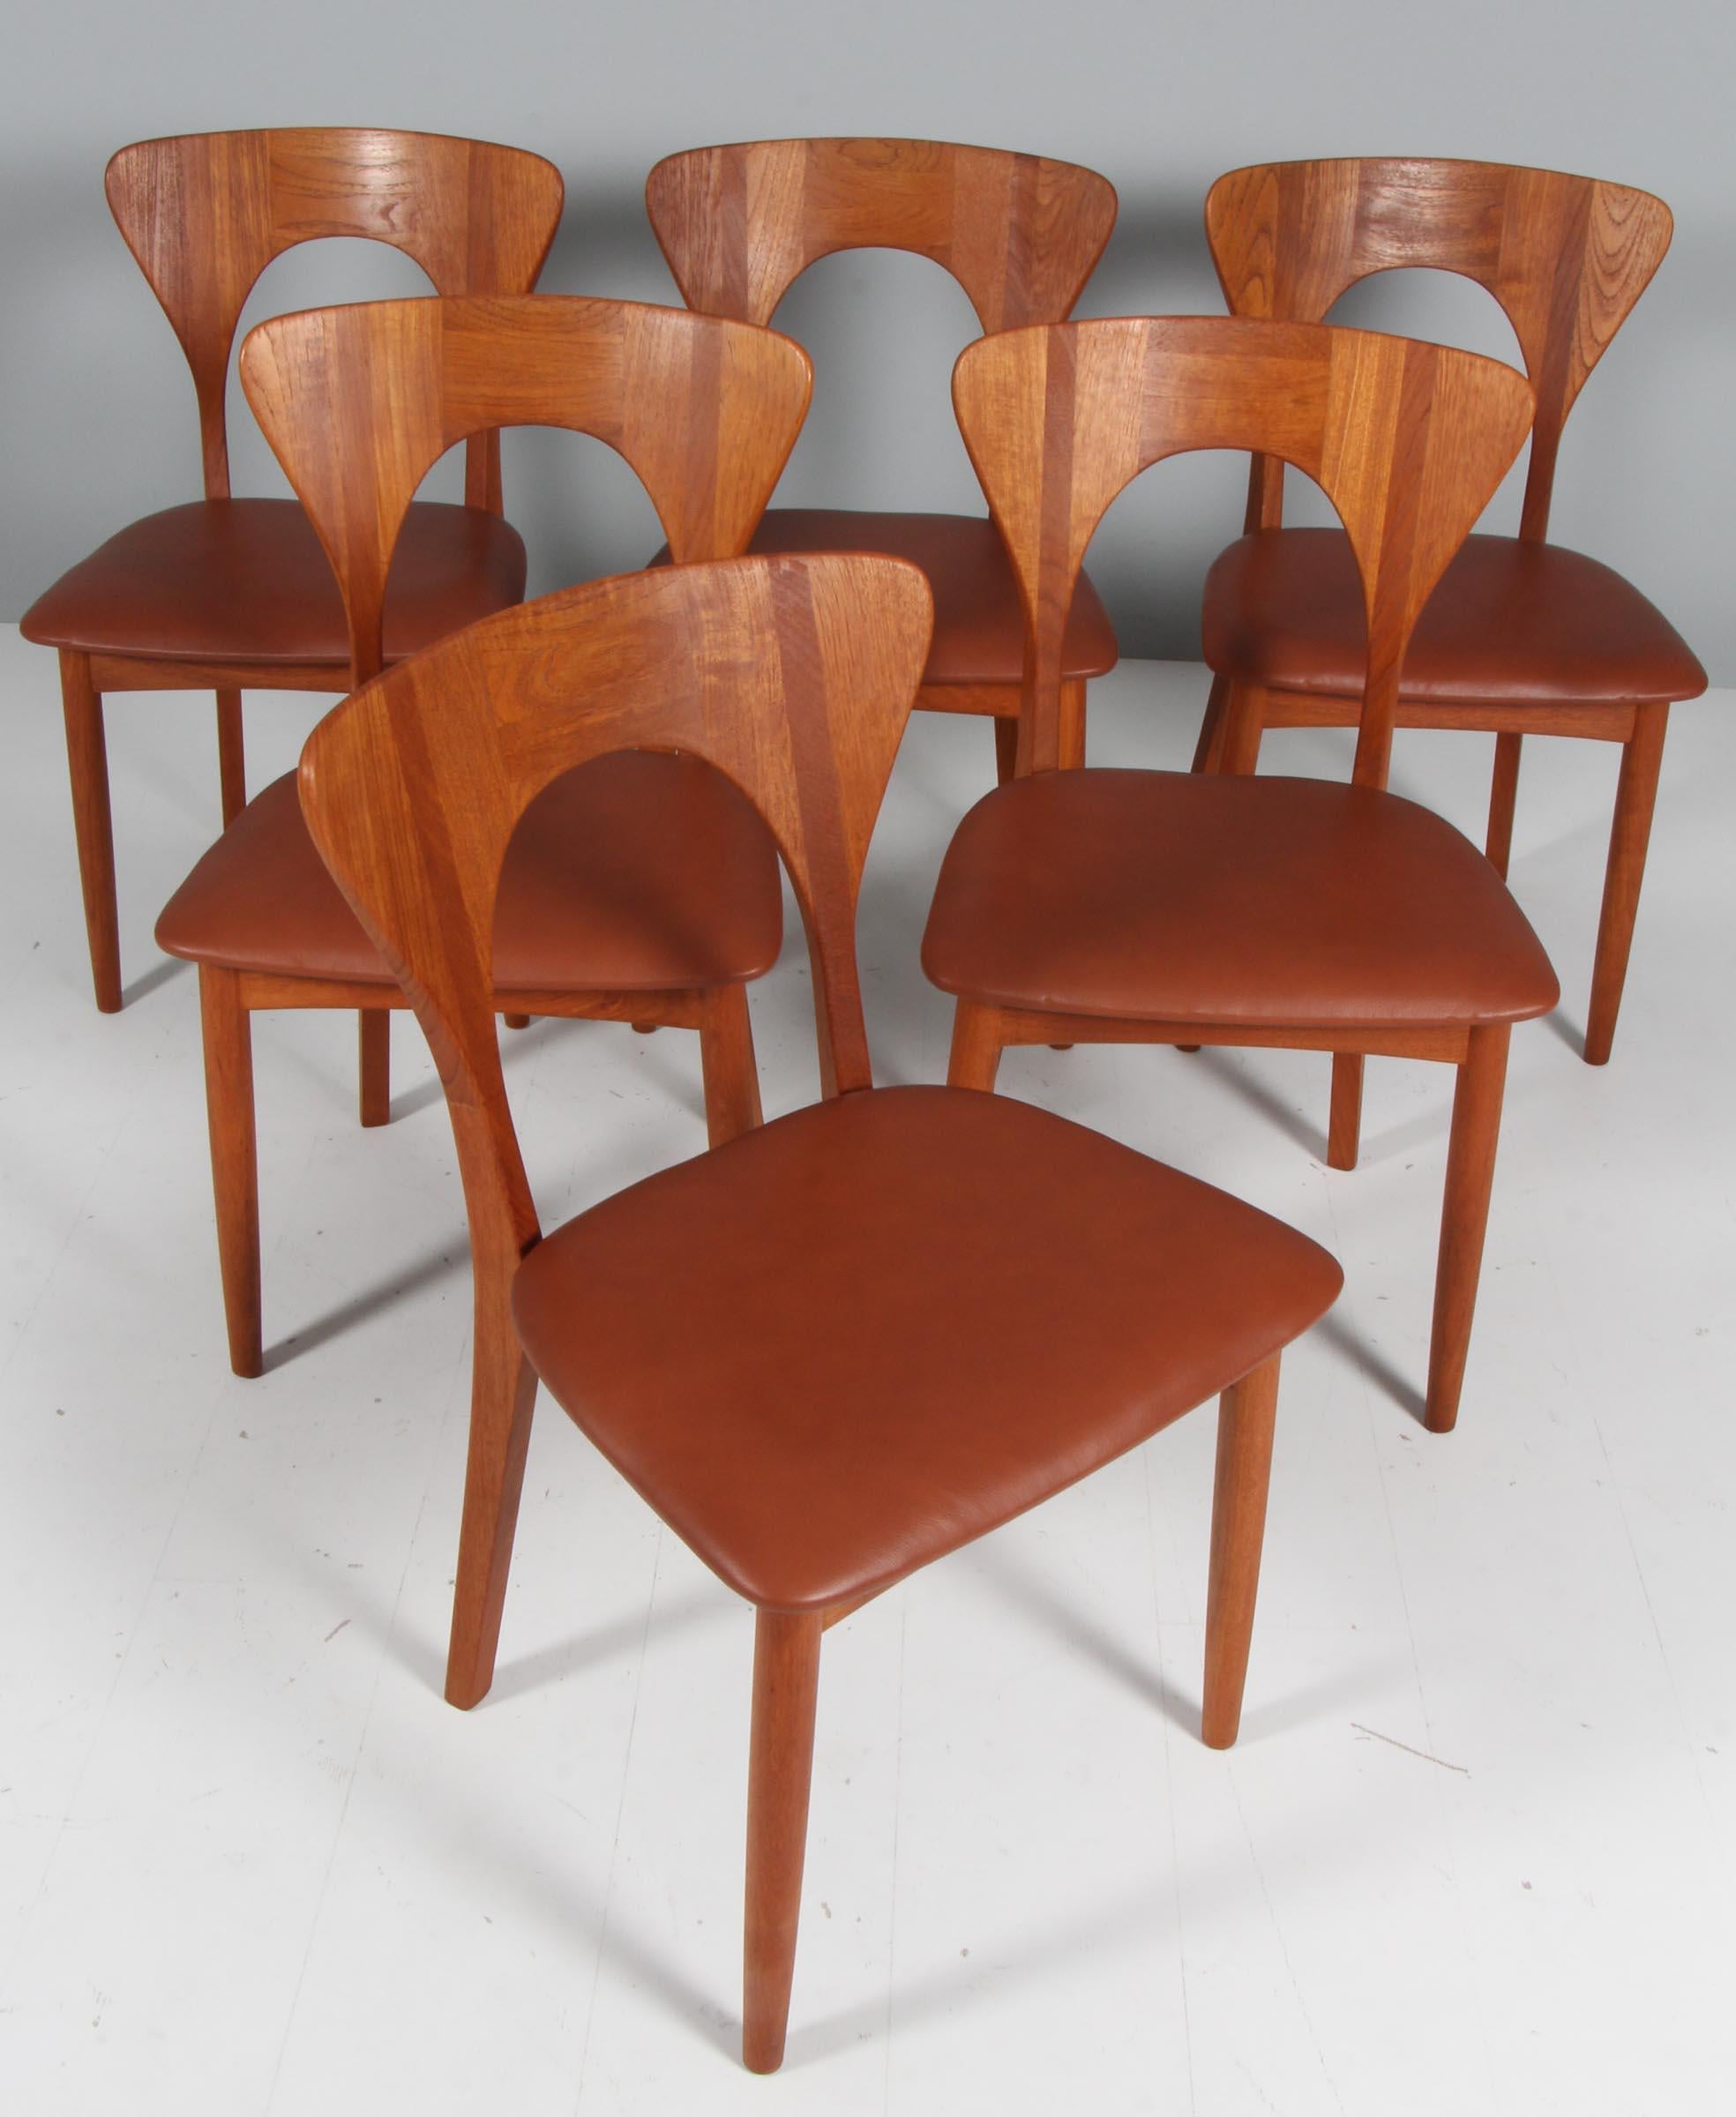 Set of six Niels Koefoed dining chairs in massive teak.

Model: Peter

Upholstered with cognac aniline leather.

Made by Koefoeds Møbelfabrik.